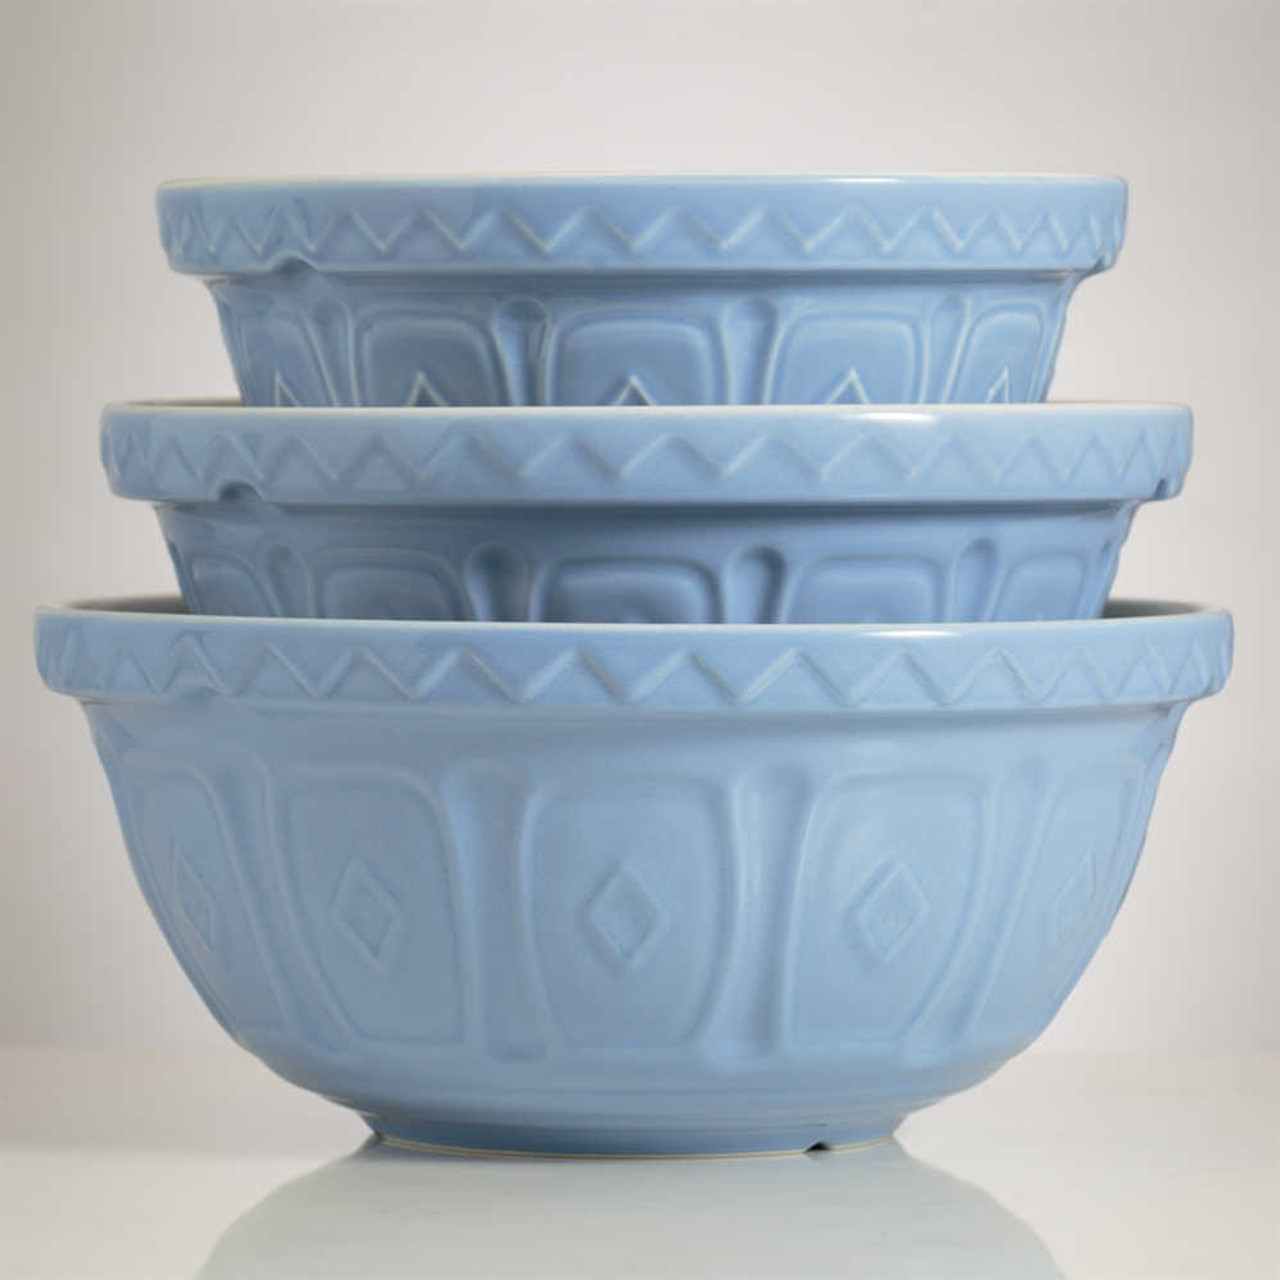 https://cdn11.bigcommerce.com/s-hccytny0od/images/stencil/1280x1280/products/5265/22722/Mason_Cash_Color_Mix_Powder_Blue_Mixing_Bowl__42527.1676321037.jpg?c=2?imbypass=on